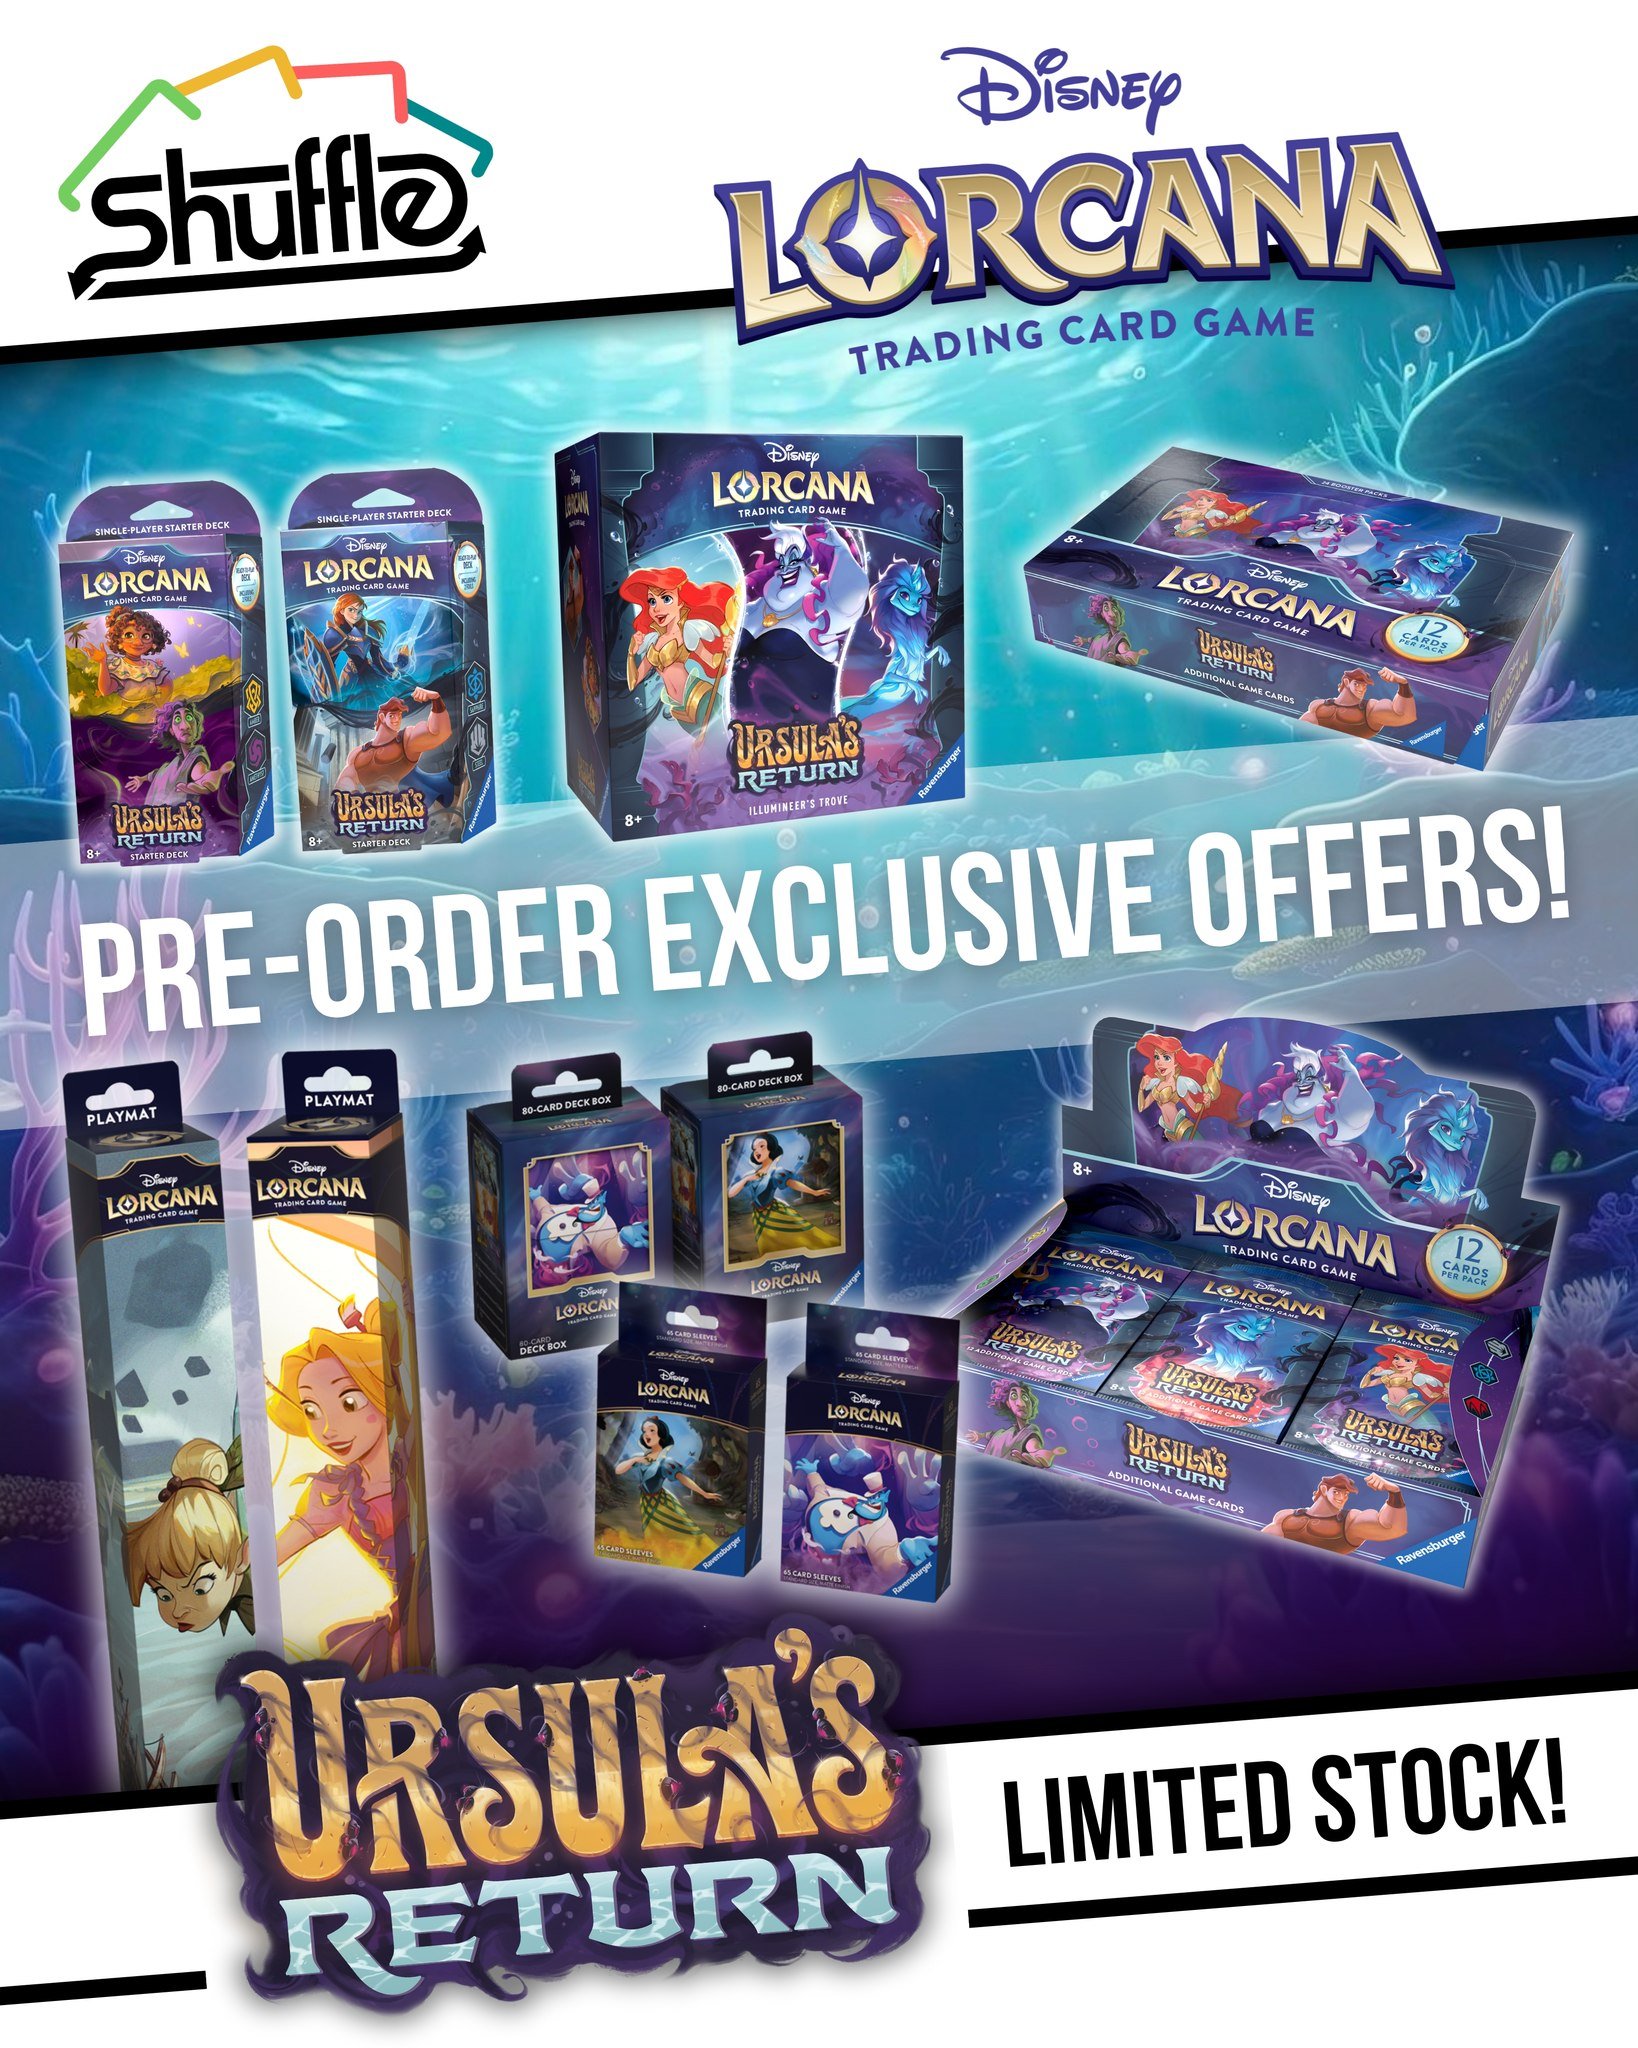 🐙 PRE-ORDERS for LORCANA: URSULA'S RETURN are now OPEN! 🐙

BOOSTER BOXES - &pound;109.95 🏷️
BOOSTER PACKS - &pound;5 🏷️
ILLUMINEER'S TROVES* - &pound;50 🏷️
⚡ (*or &pound;44.95 with a Booster Box!)
STARTER DECKS* - &pound;18 🏷️
⚡ (*or both for &